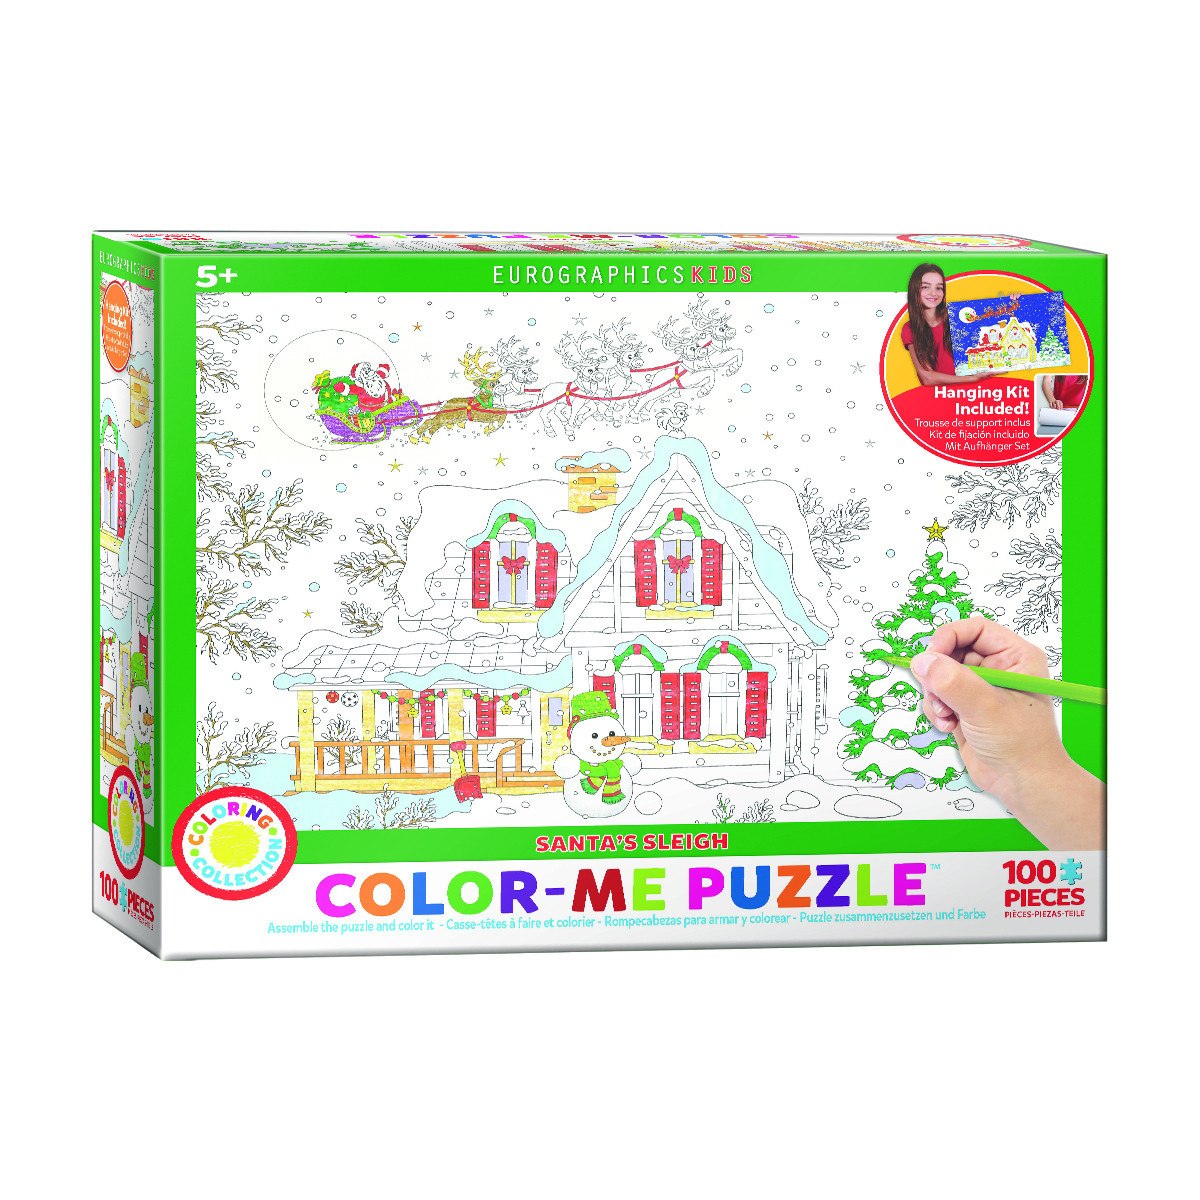 Santa's Sleigh - 100pc Coloring Jigsaw Puzzle by Eurographics  			  					NEW